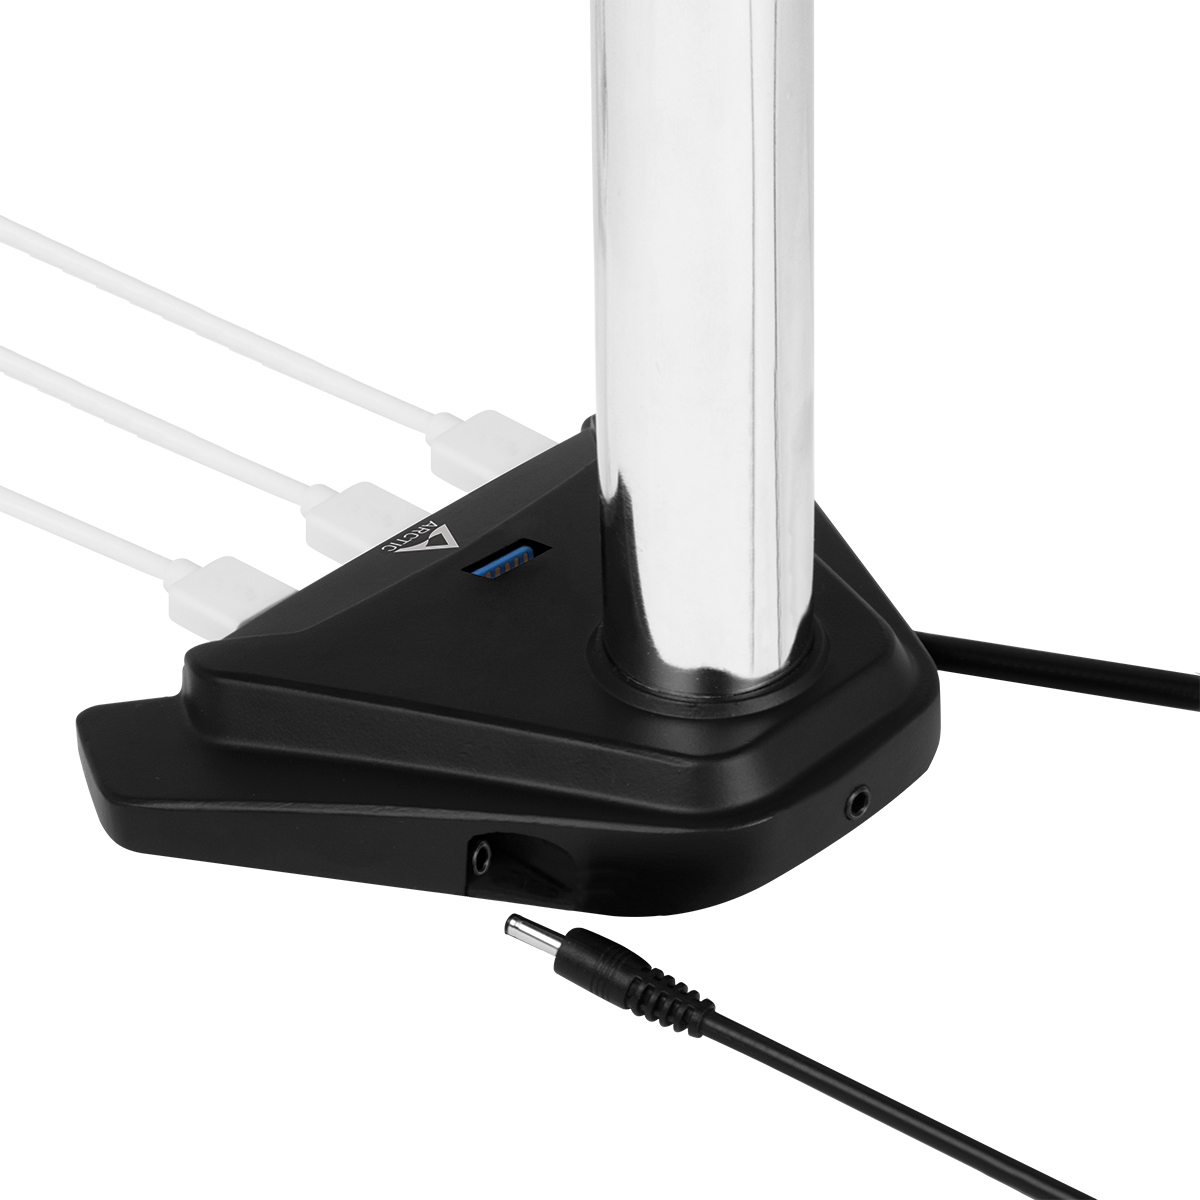 Desk Mount Dual Monitor Arm with SuperSpeed USB Hub ARCTIC Z2 Pro (Gen 3) Detail View SuperSpeed USB Hub